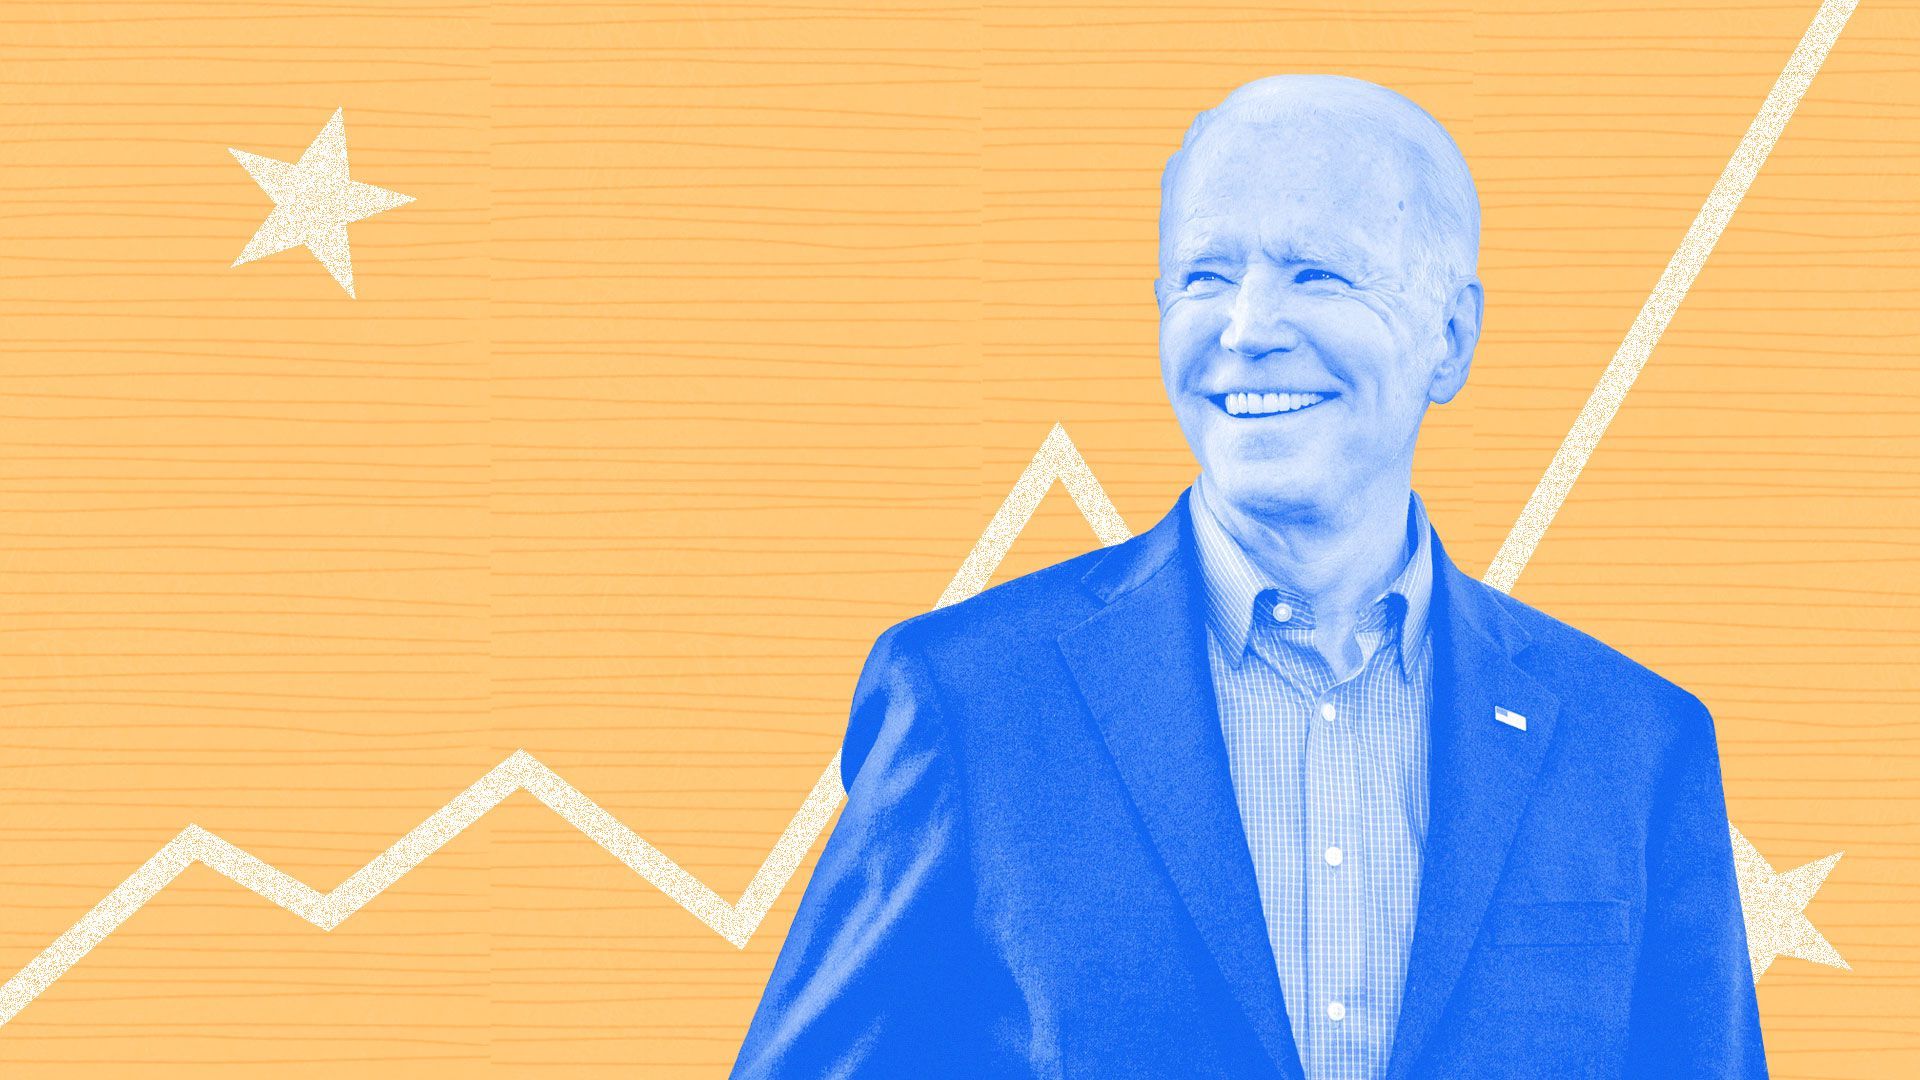 Photo illustration of Joseph Biden smiling with an upwards trending line and stars